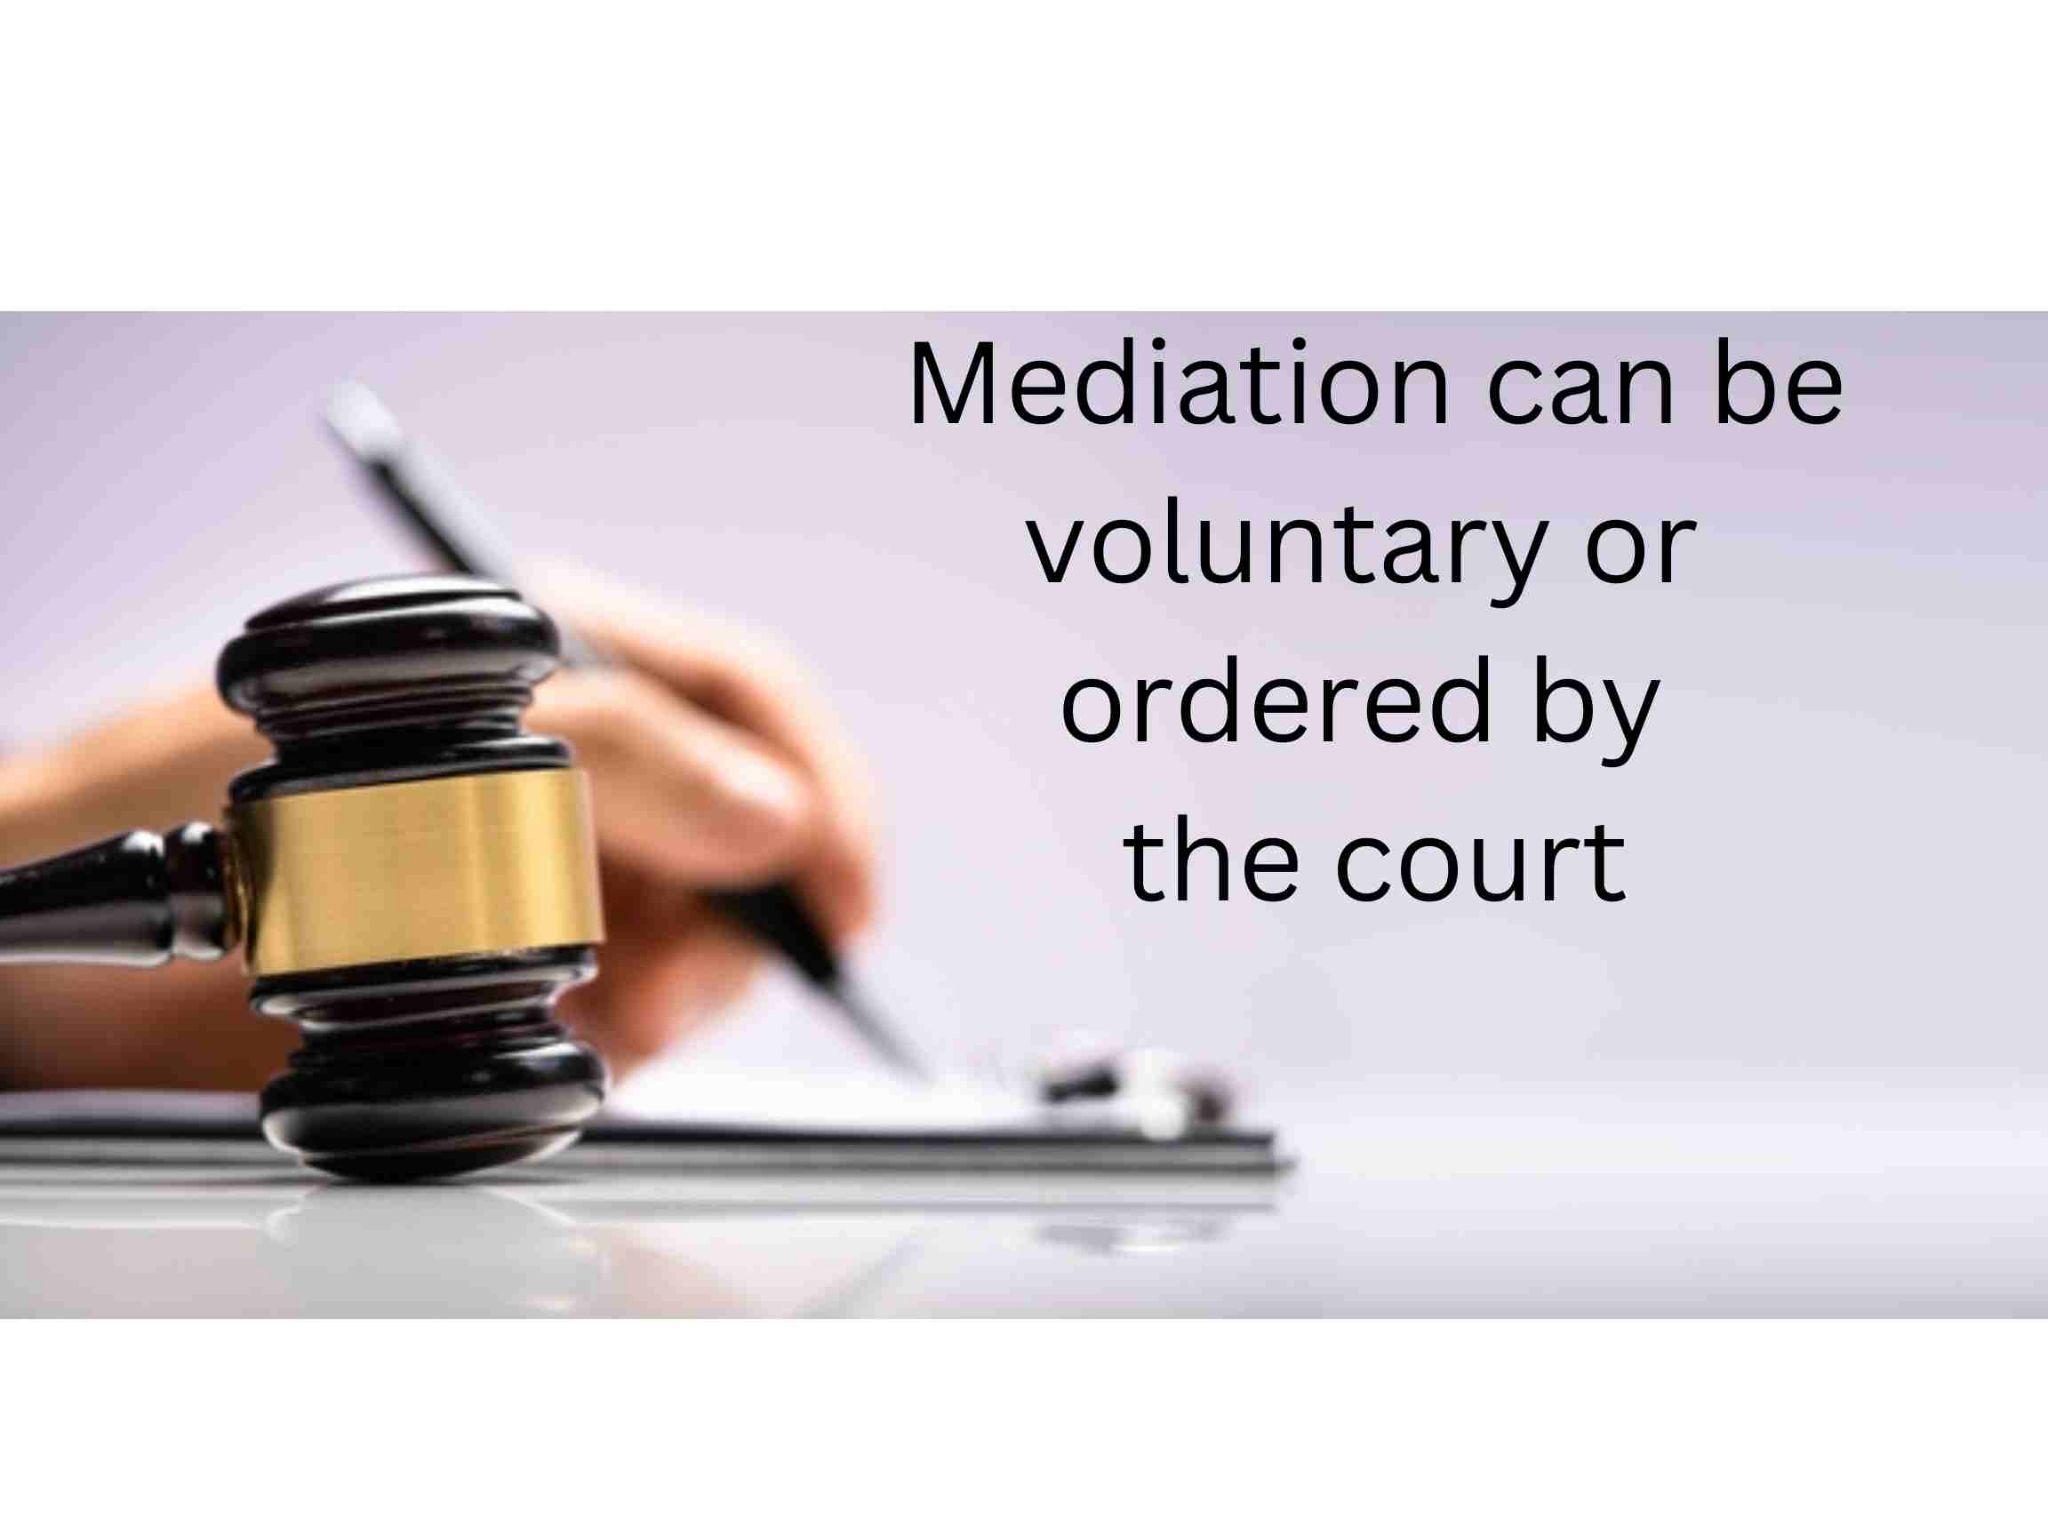 A gavel sits on a table with a hand writing in the background. The text reads, "Mediation can be voluntary or ordered by the court, offering a peaceful path even in cases of divorce.